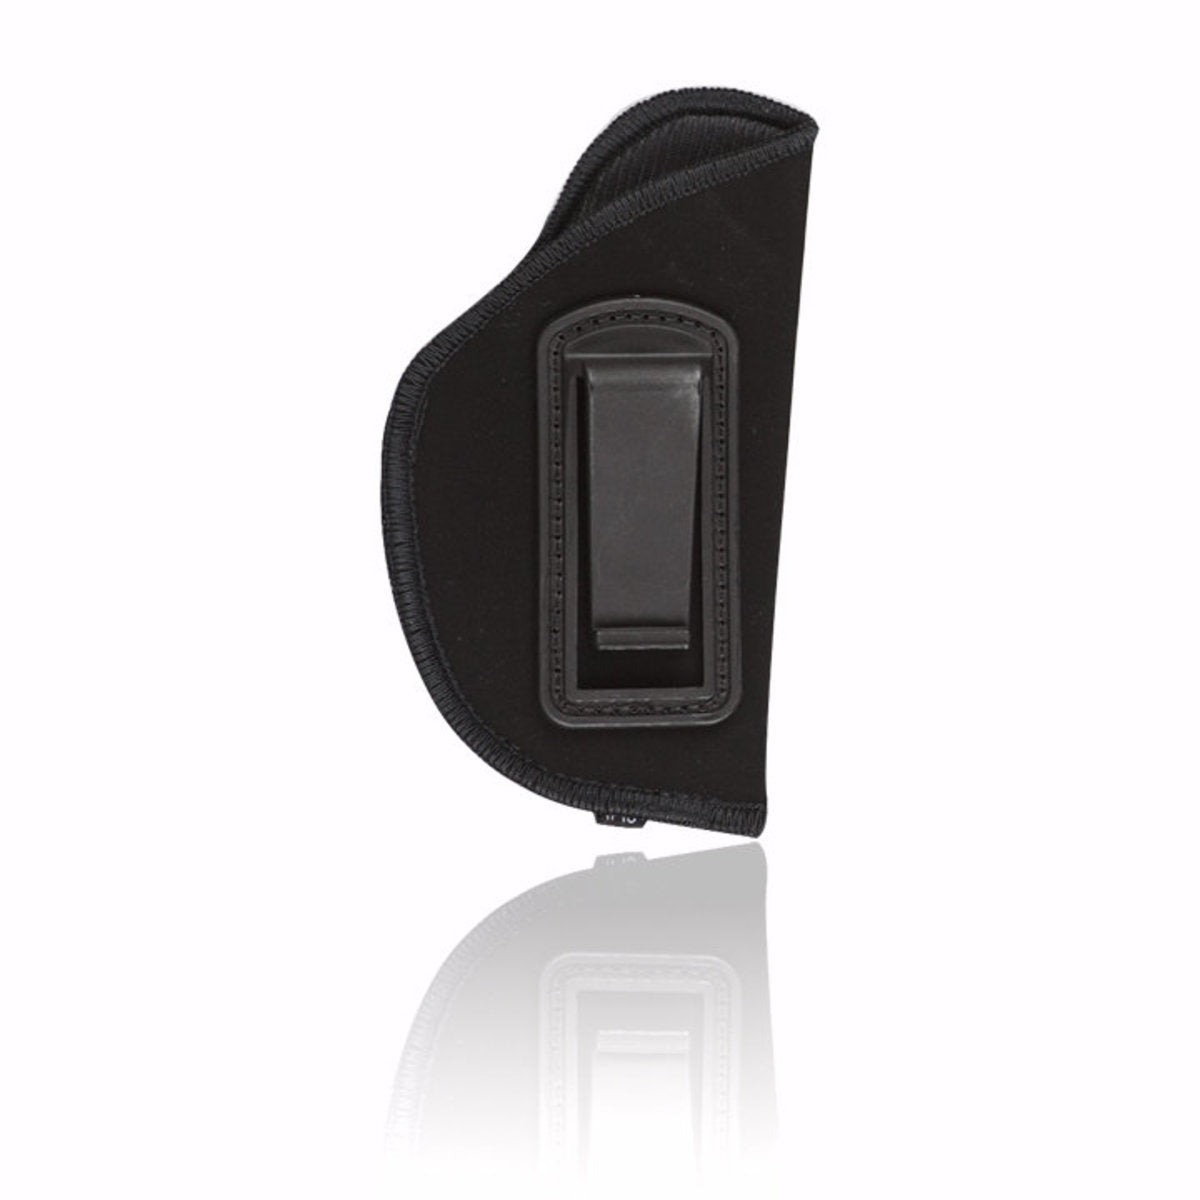 Cytac Universal Iwb Holster - Fits Small .22 - .25 Caliber Autos